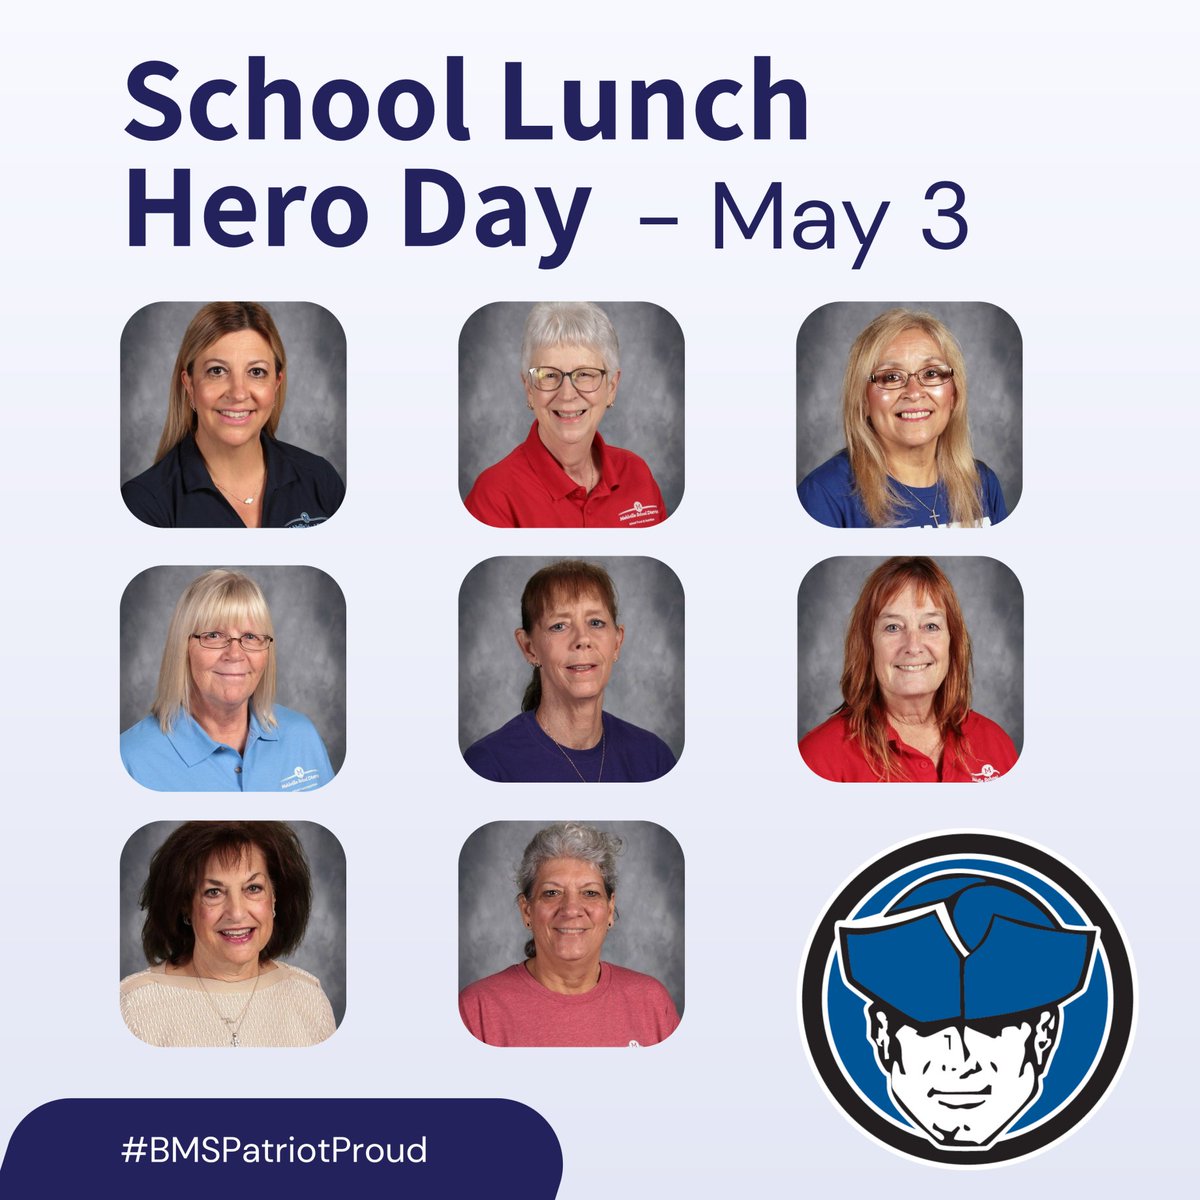 On behalf of the entire school community, we would like to extend our sincerest appreciation and gratitude to the hardworking and dedicated Bernard Cafeteria staff. Thank you for everything you do! #BMSPatriotProud #MSDR9